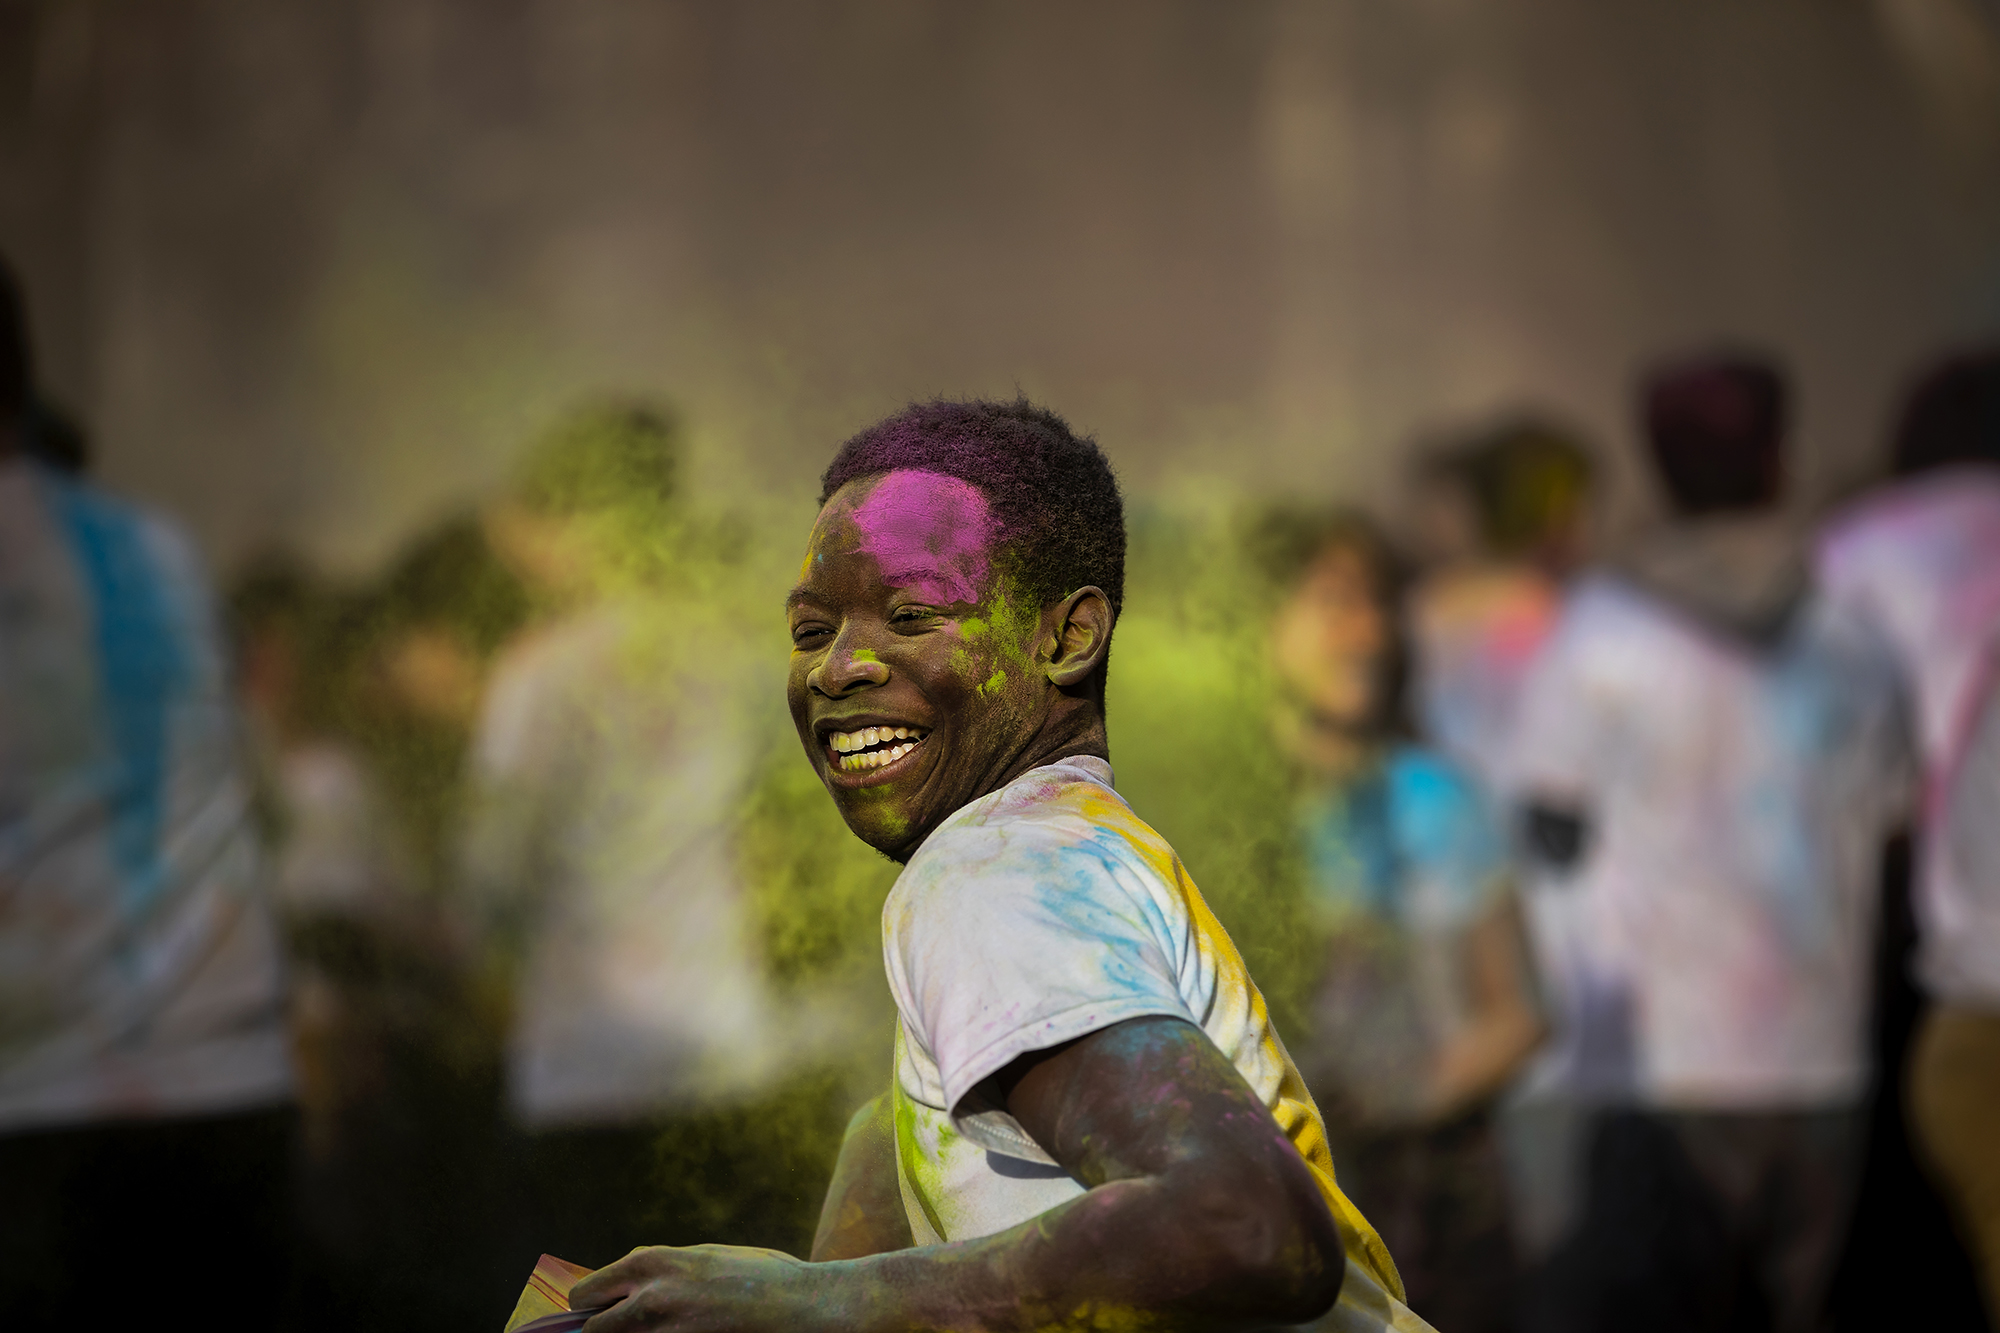 A person covered in colorful powder smiles.